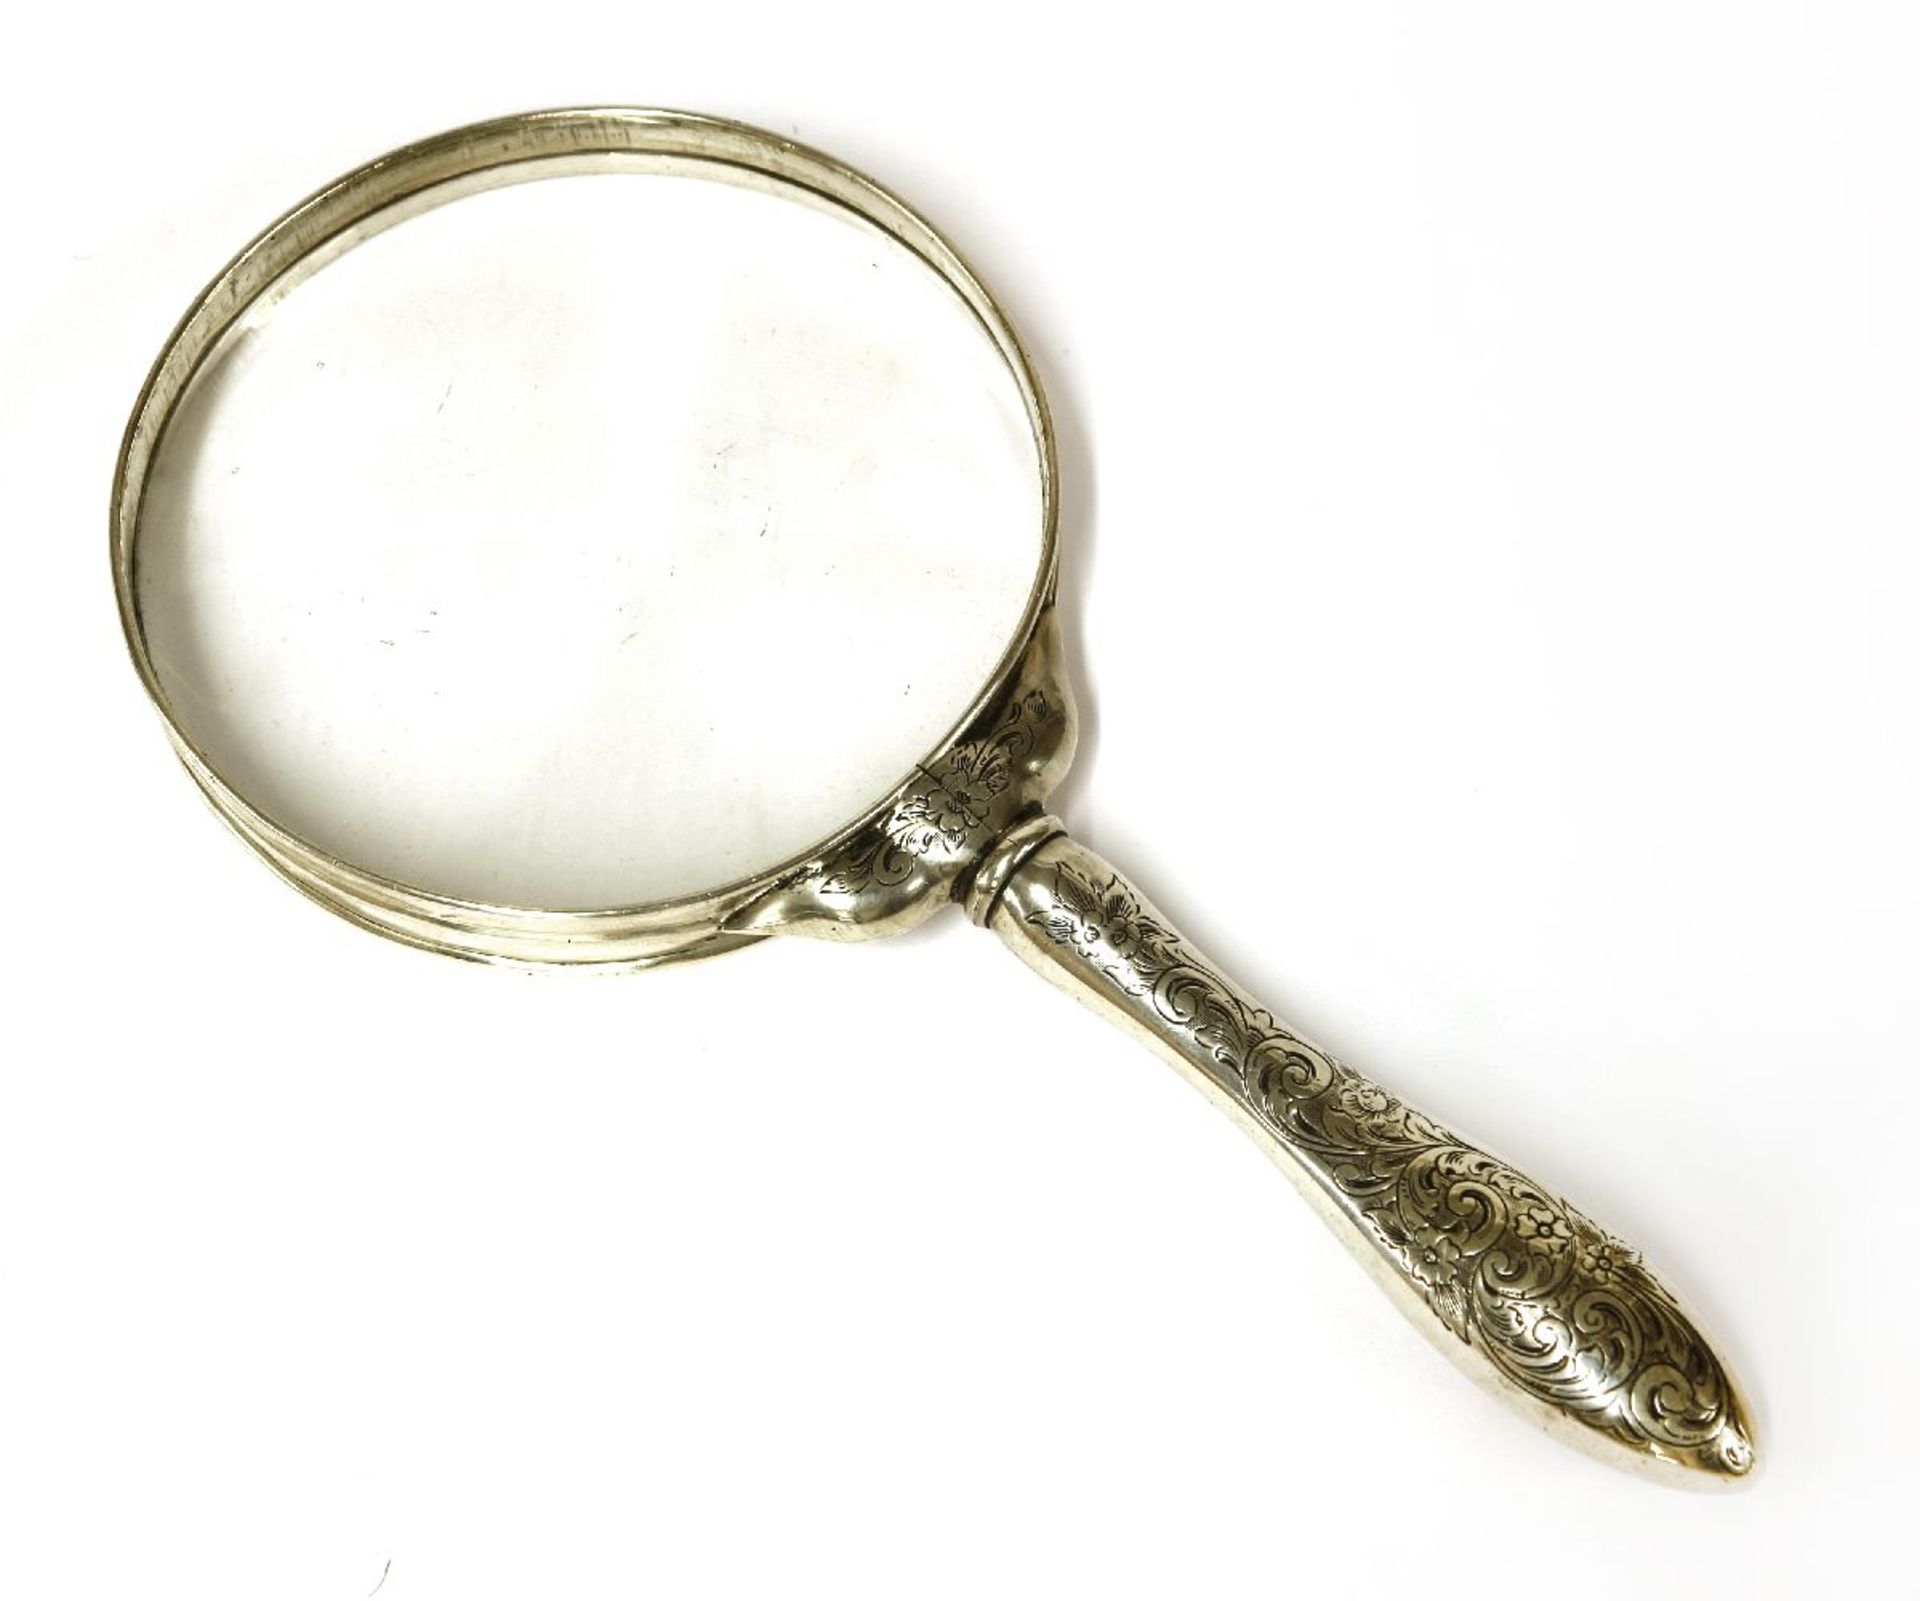 An American silver magnifying glass,by Gorham, late 19th century,20.5cm longProvenance: The Tim